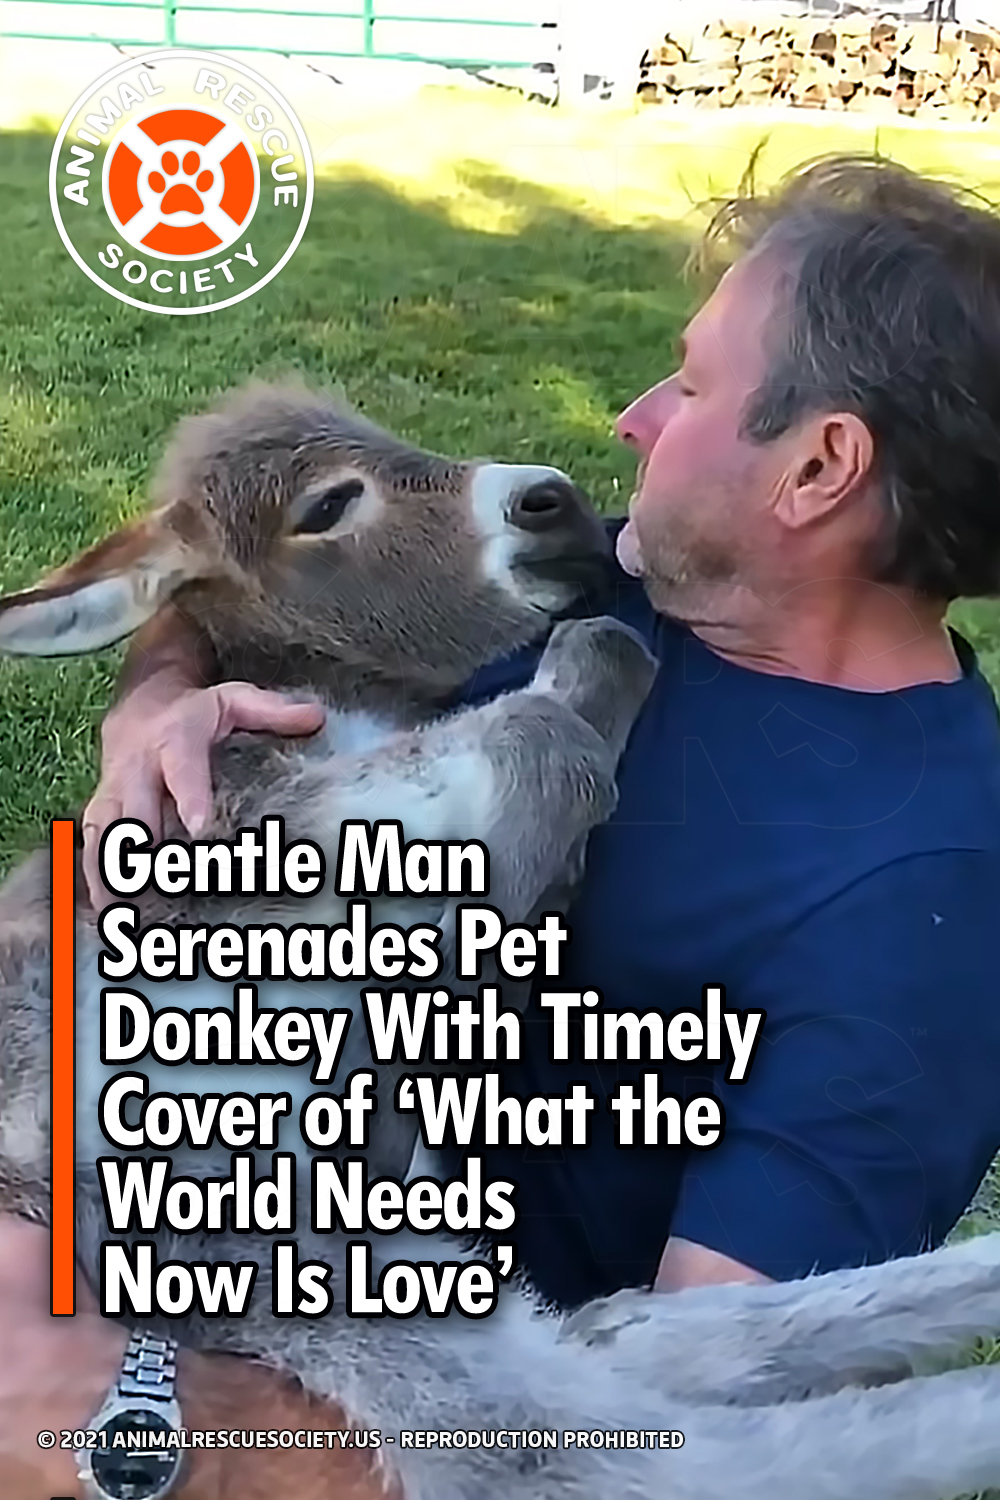 Gentle Man Serenades Pet Donkey With Timely Cover of ‘What the World Needs Now Is Love’